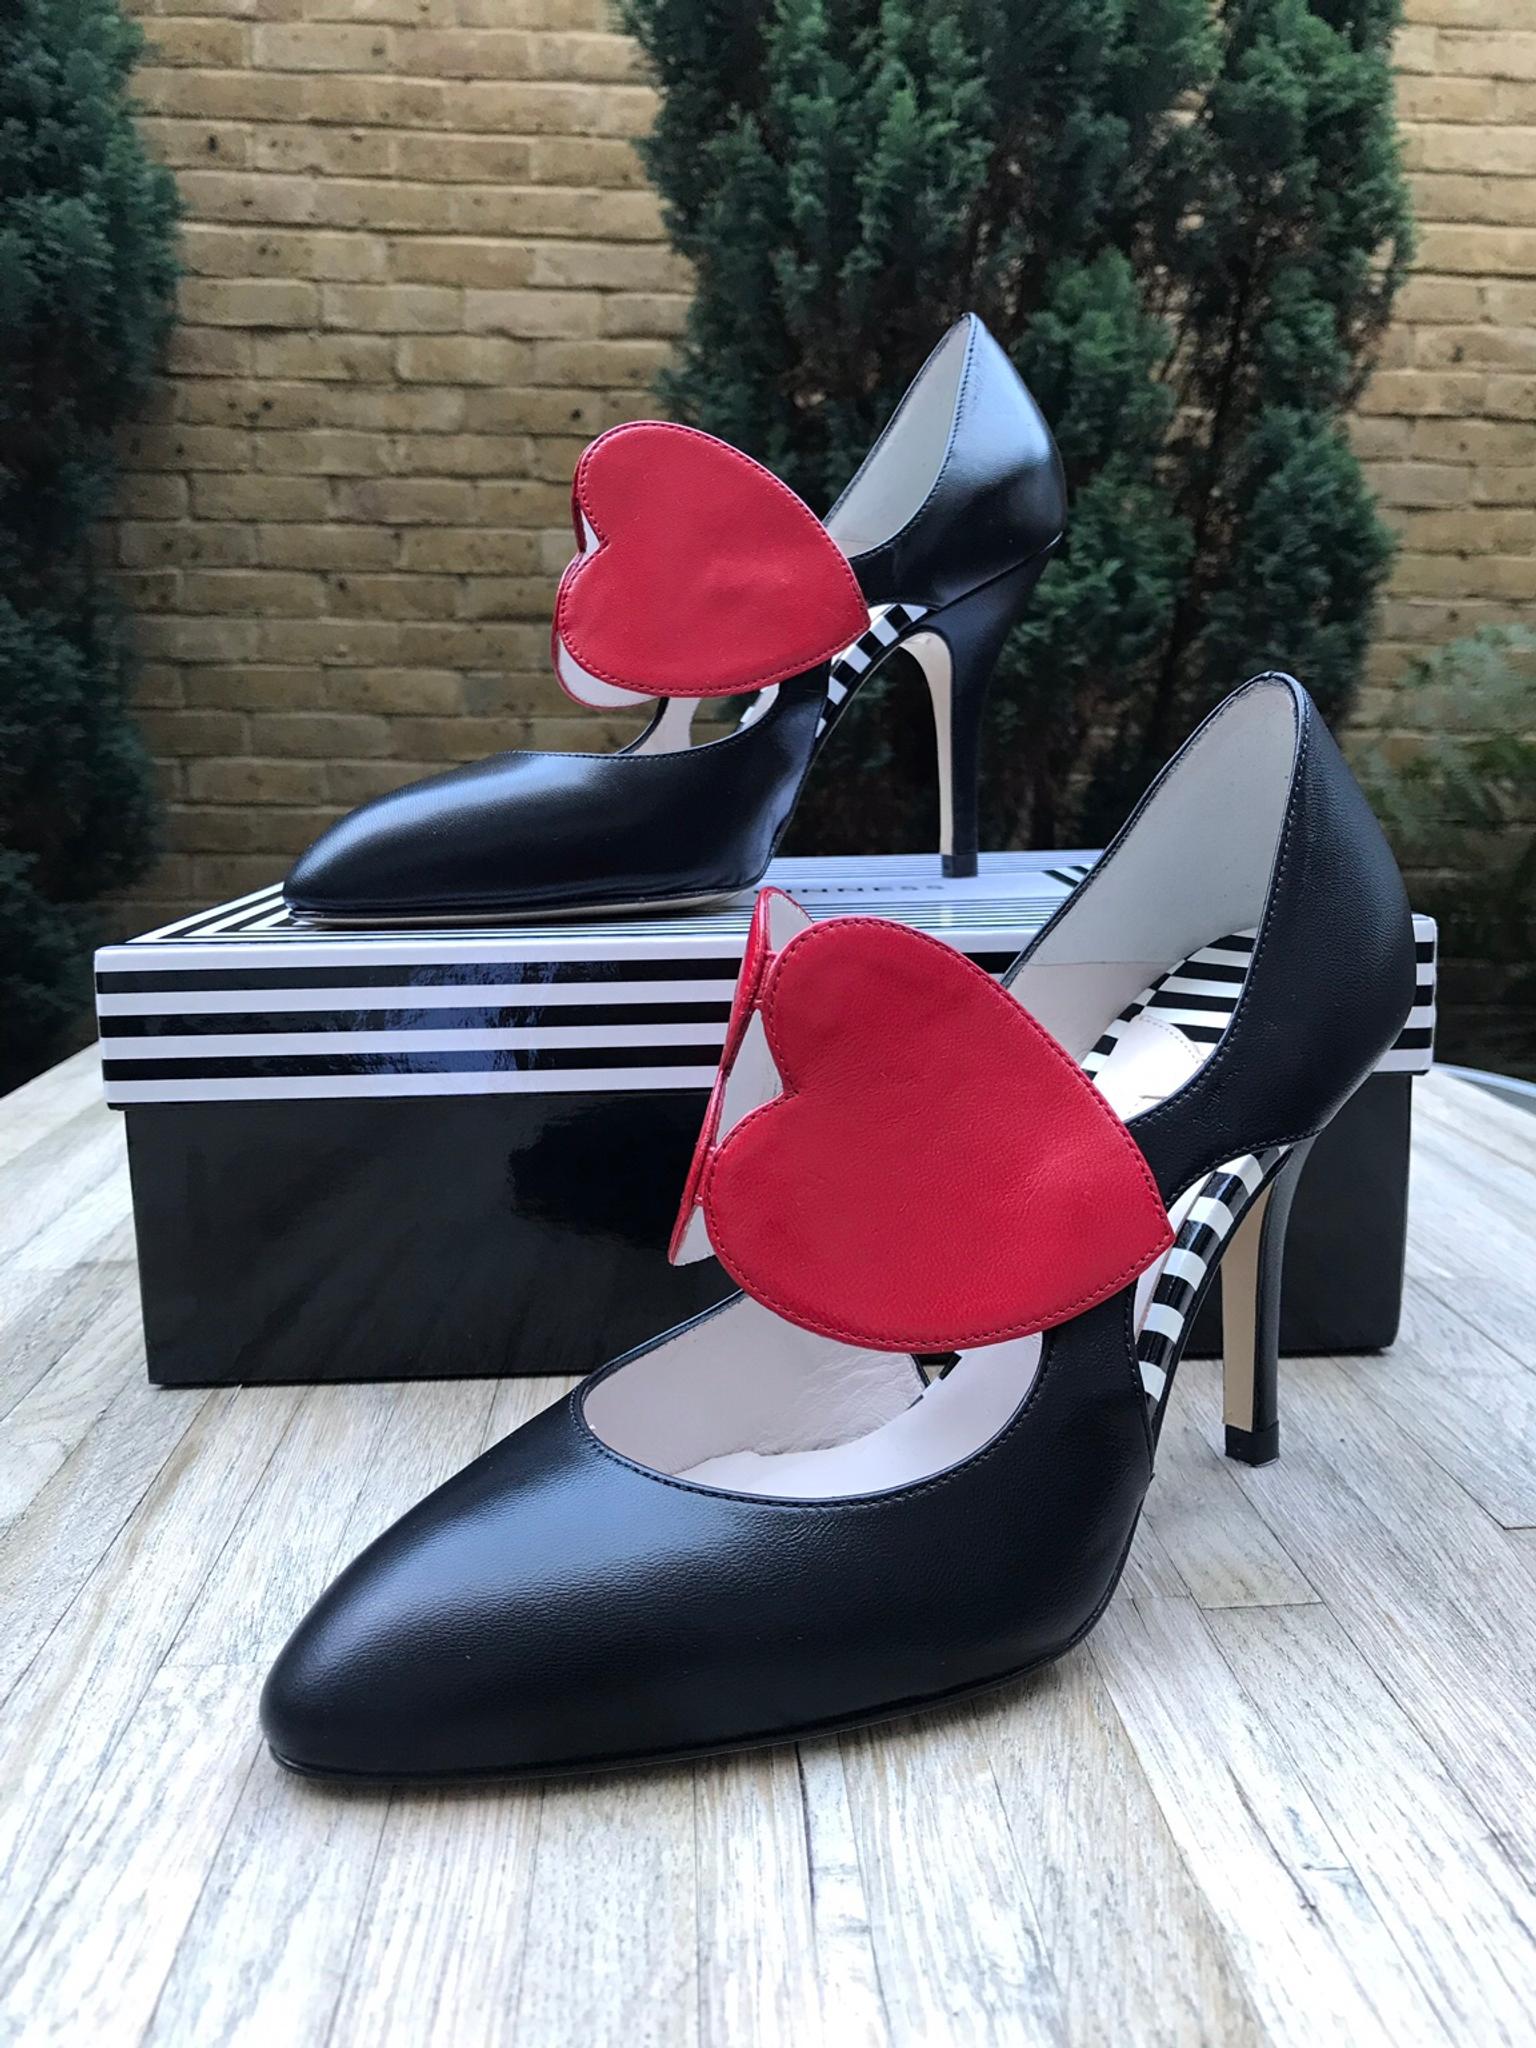 LuLu Guinness In Love Rose Court Shoes 